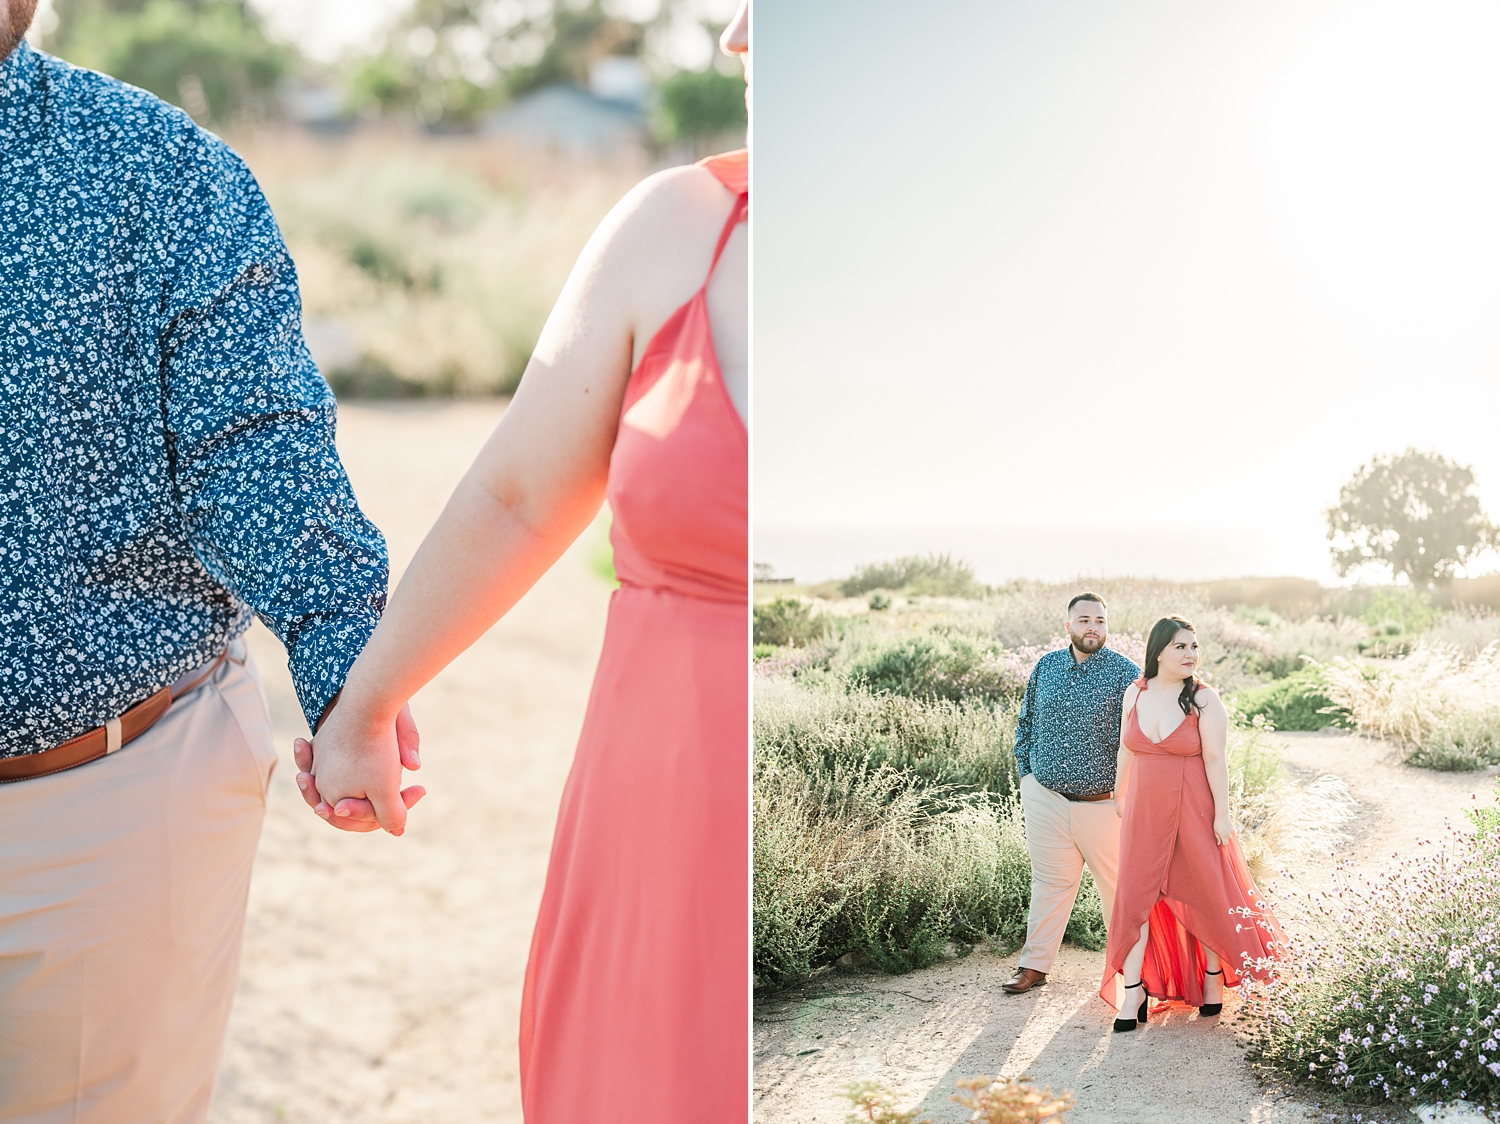 Beach Cliffs Engagement Session at Sunset | Nataly Hernandez Photography | Edwin and Susana-19.jpg